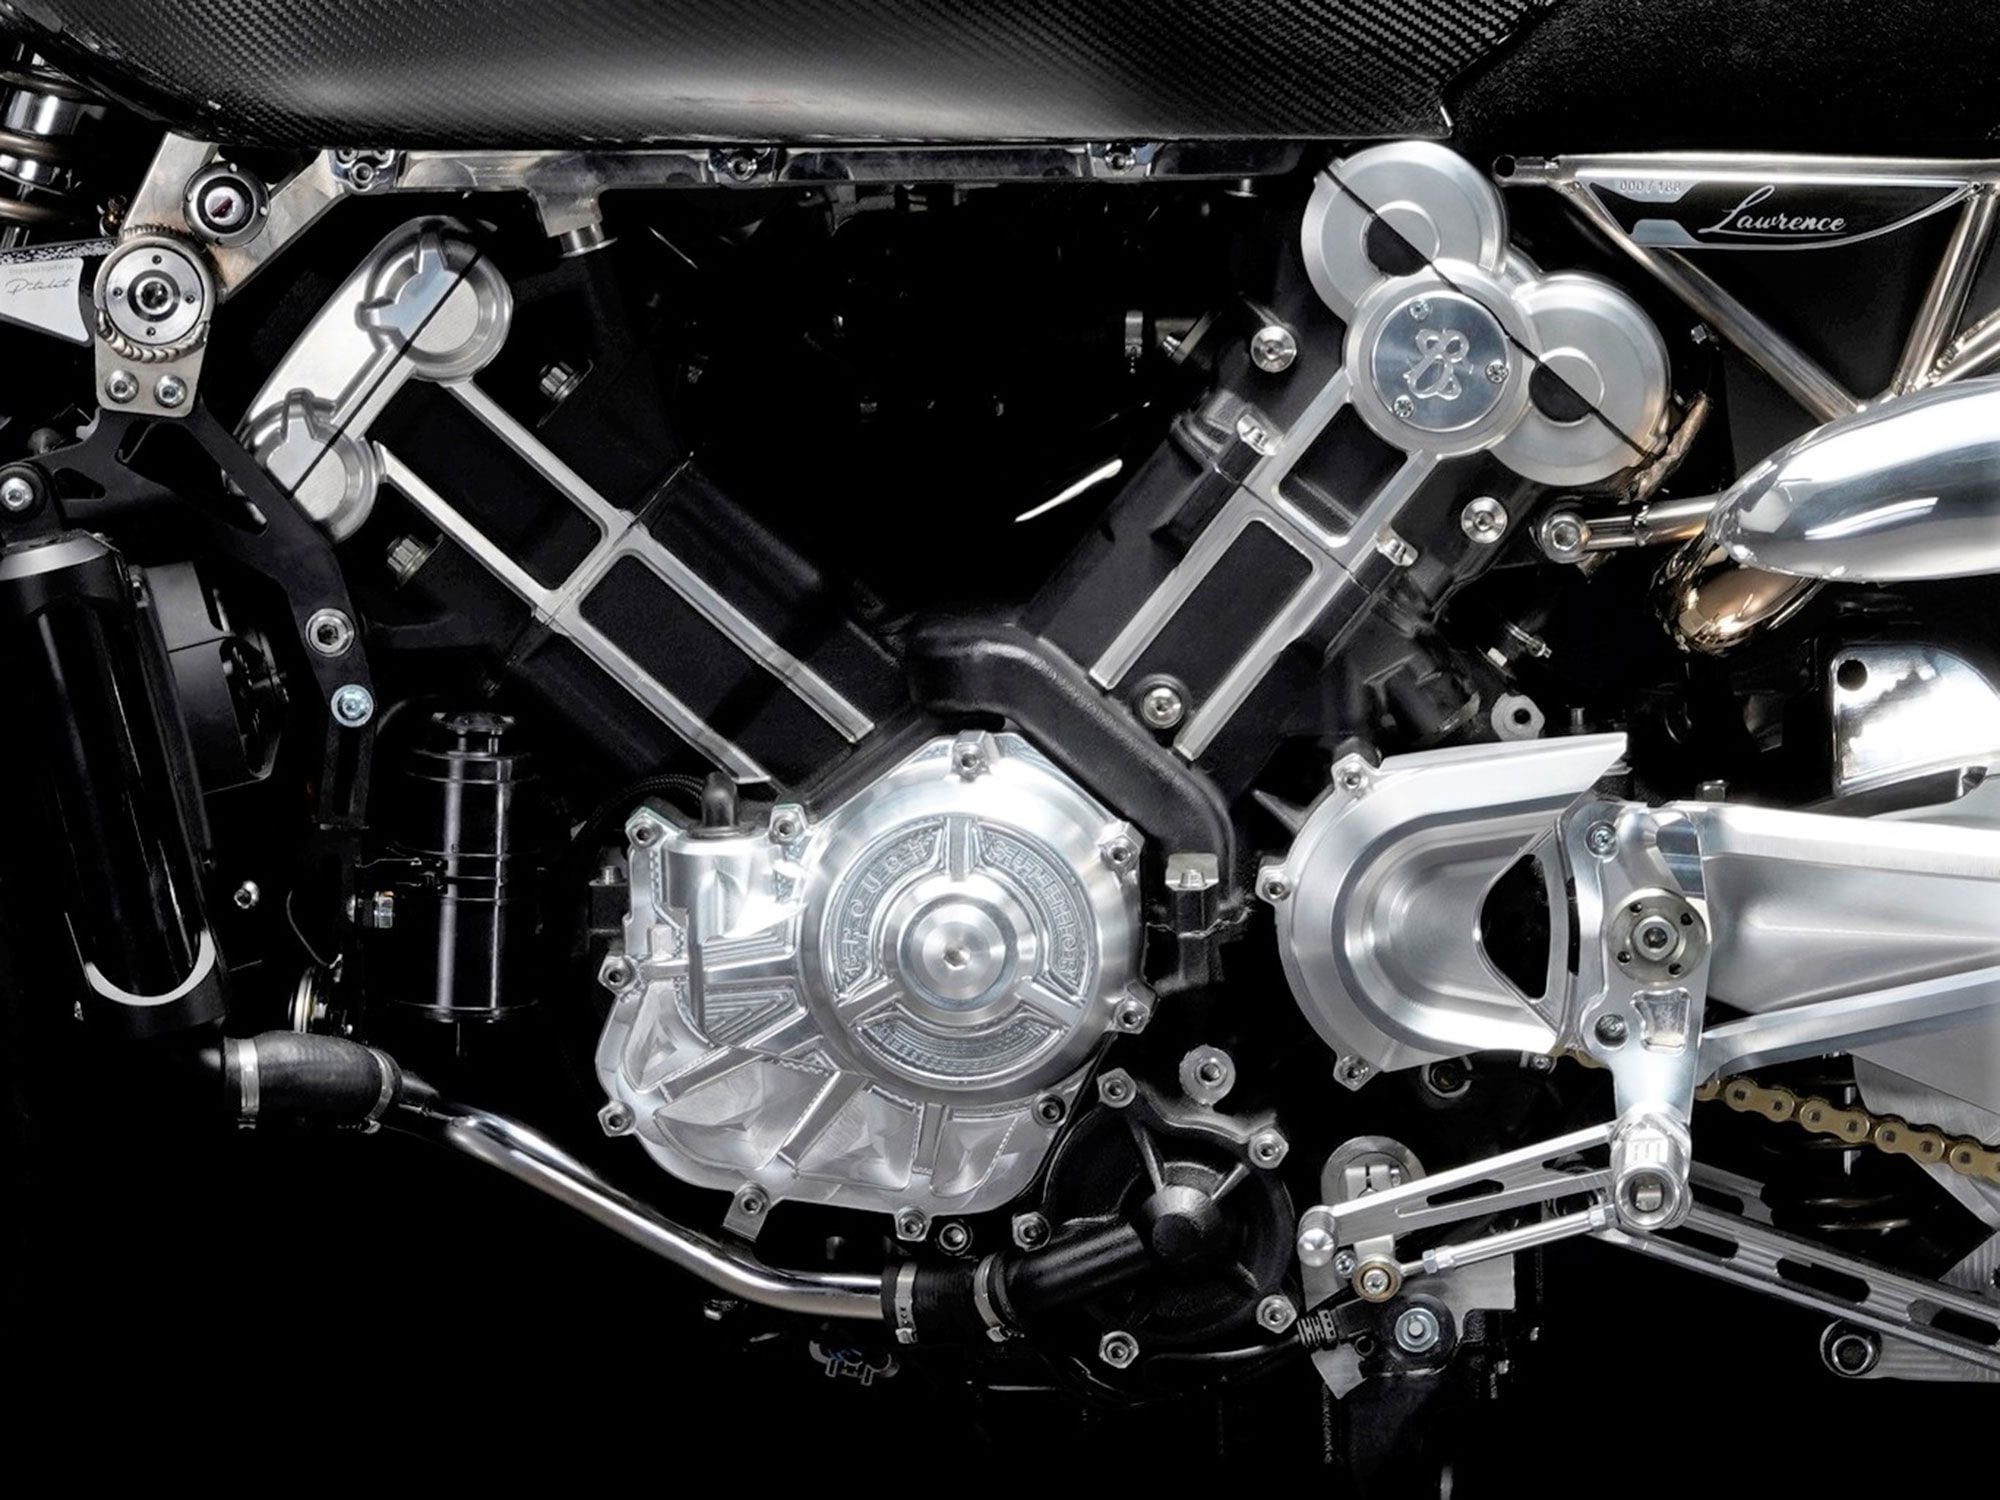 The Lawrence is powered by Brough’s in-house water-cooled, 997cc, eight-valve V-twin, claimed to output 102 hp.